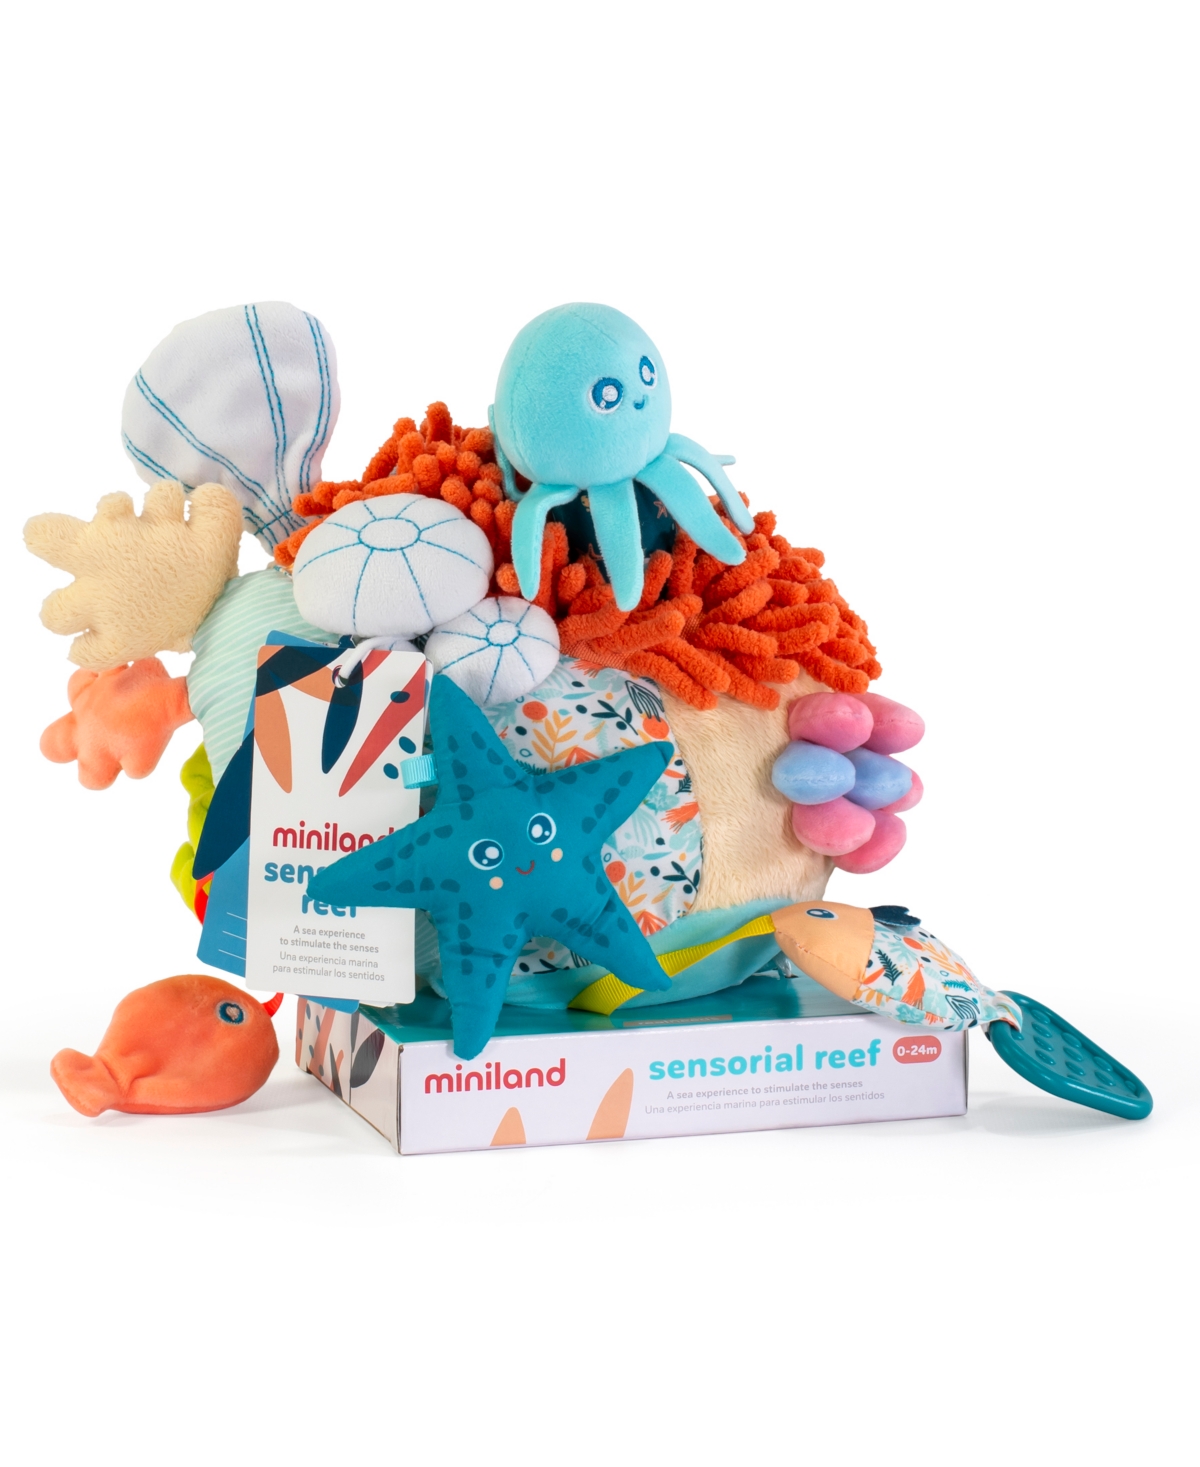 Miniland Sensorial Reef; Sensory Stimulation For Baby-multipurpose Toy In No Color